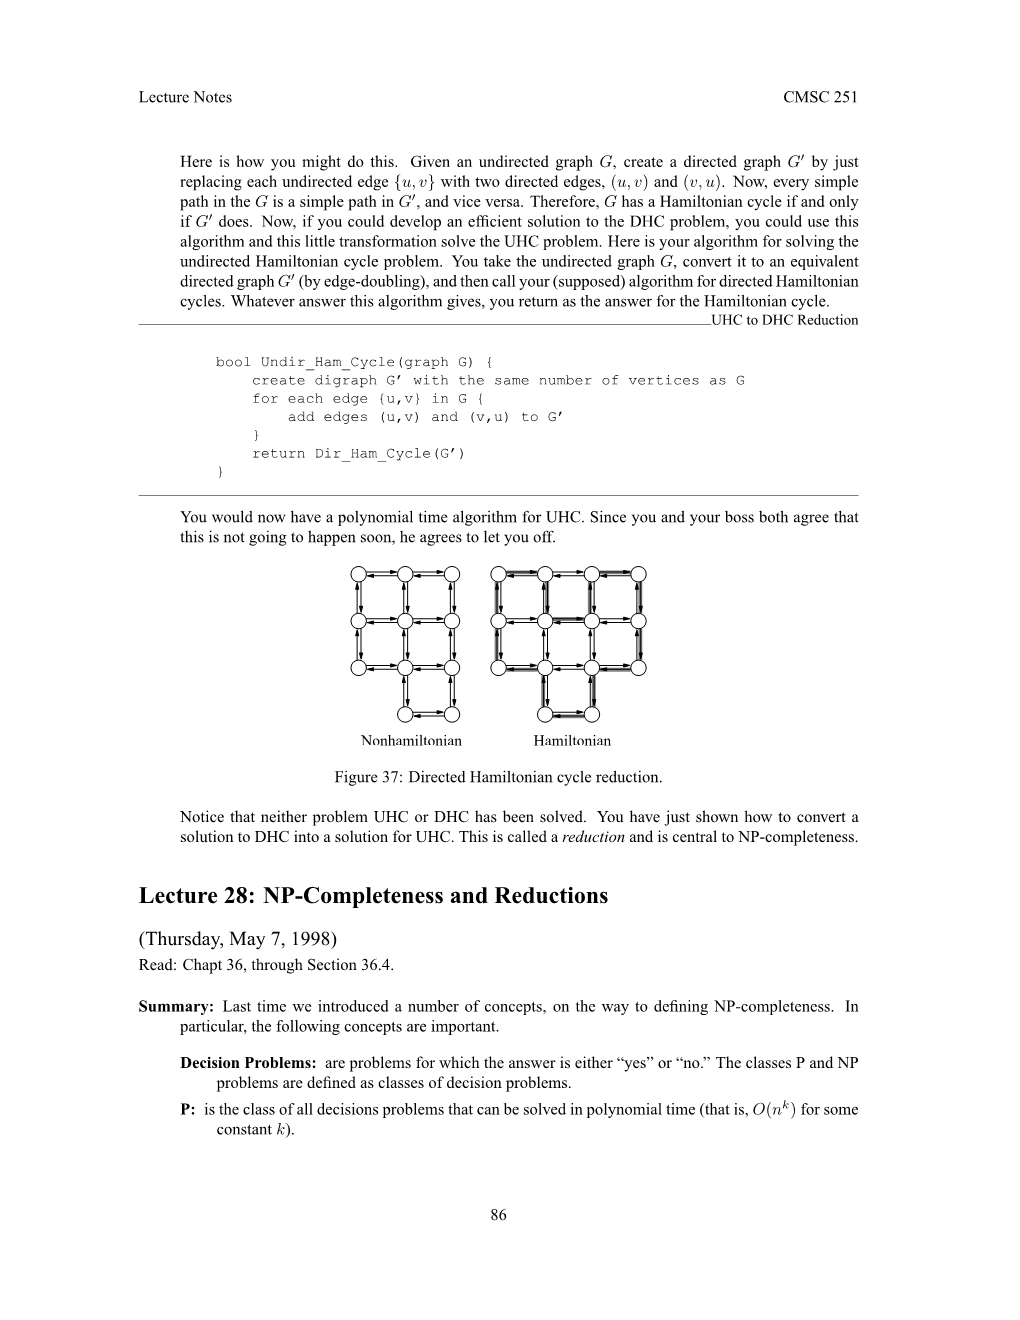 Lecture 28: NP-Completeness and Reductions